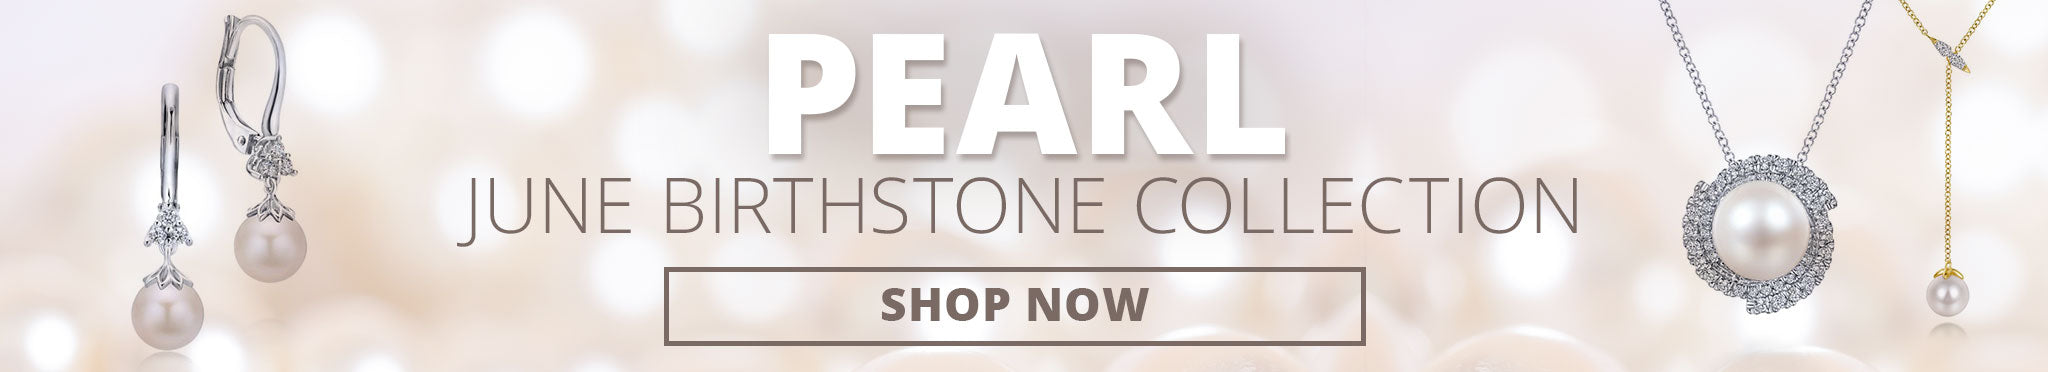 Shop the June Birthstone Collection